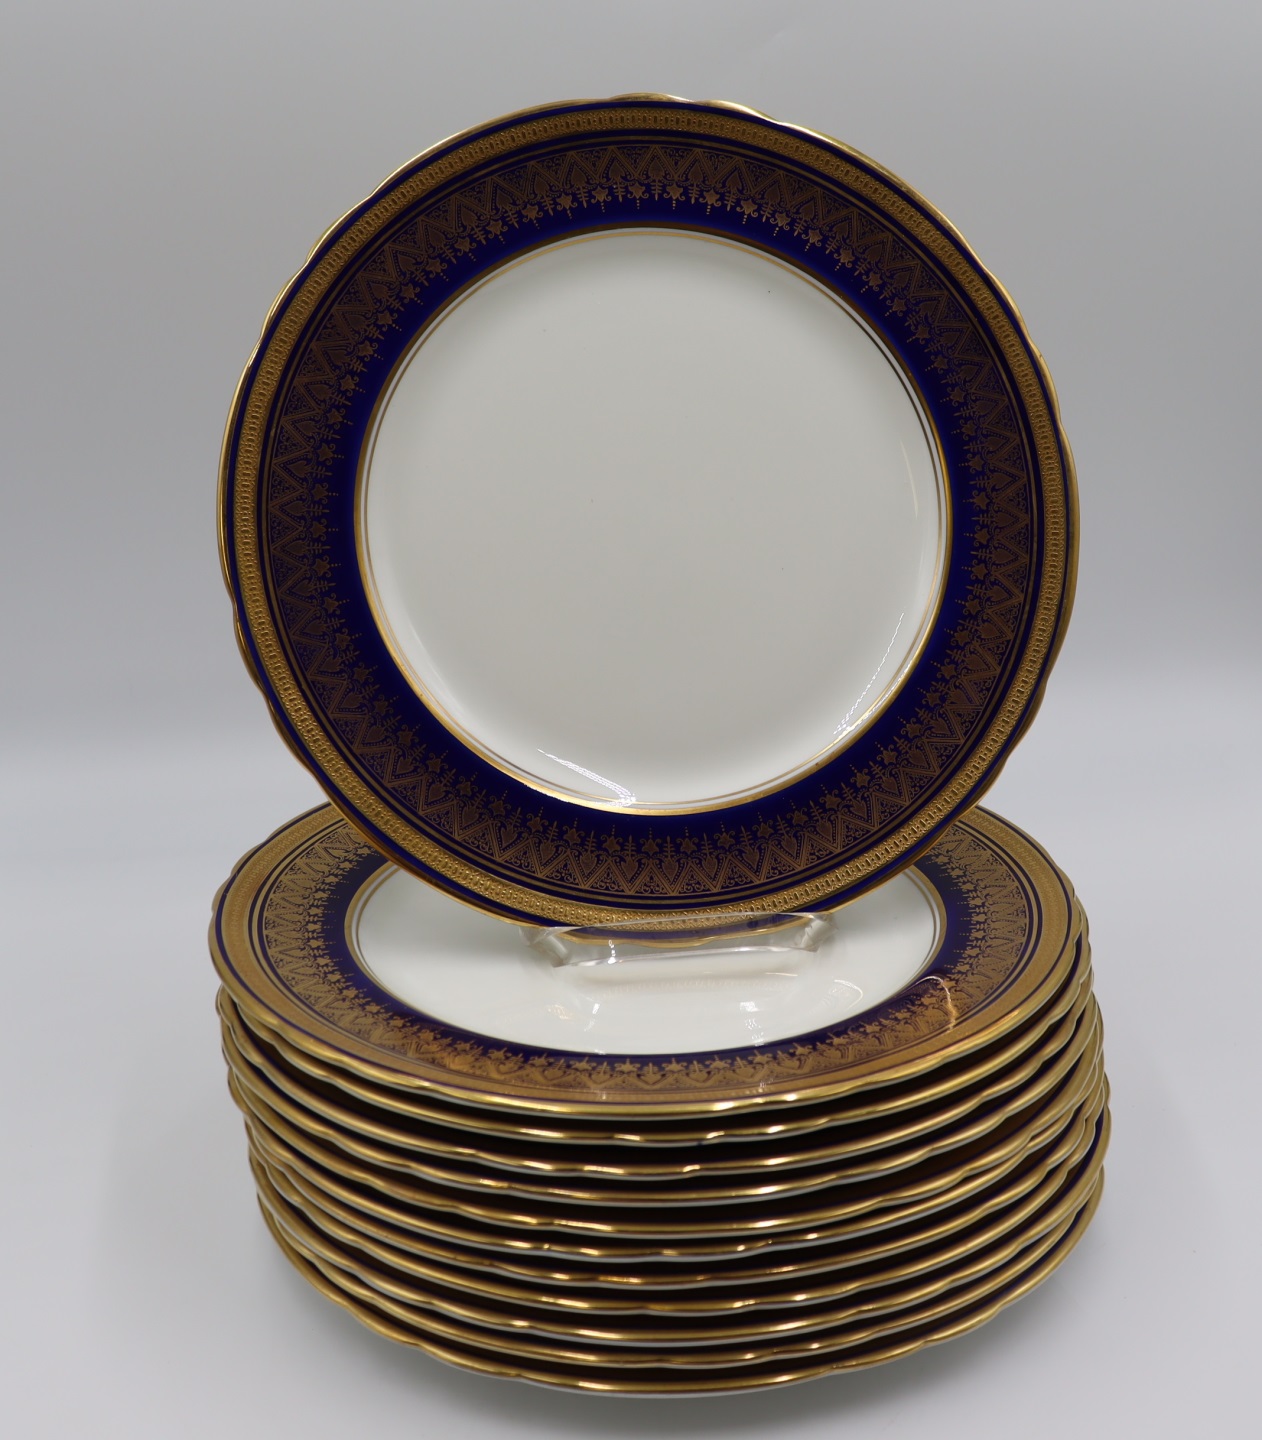 12 AYNSLEY GILT AND COBALT DECORATED 3be21c